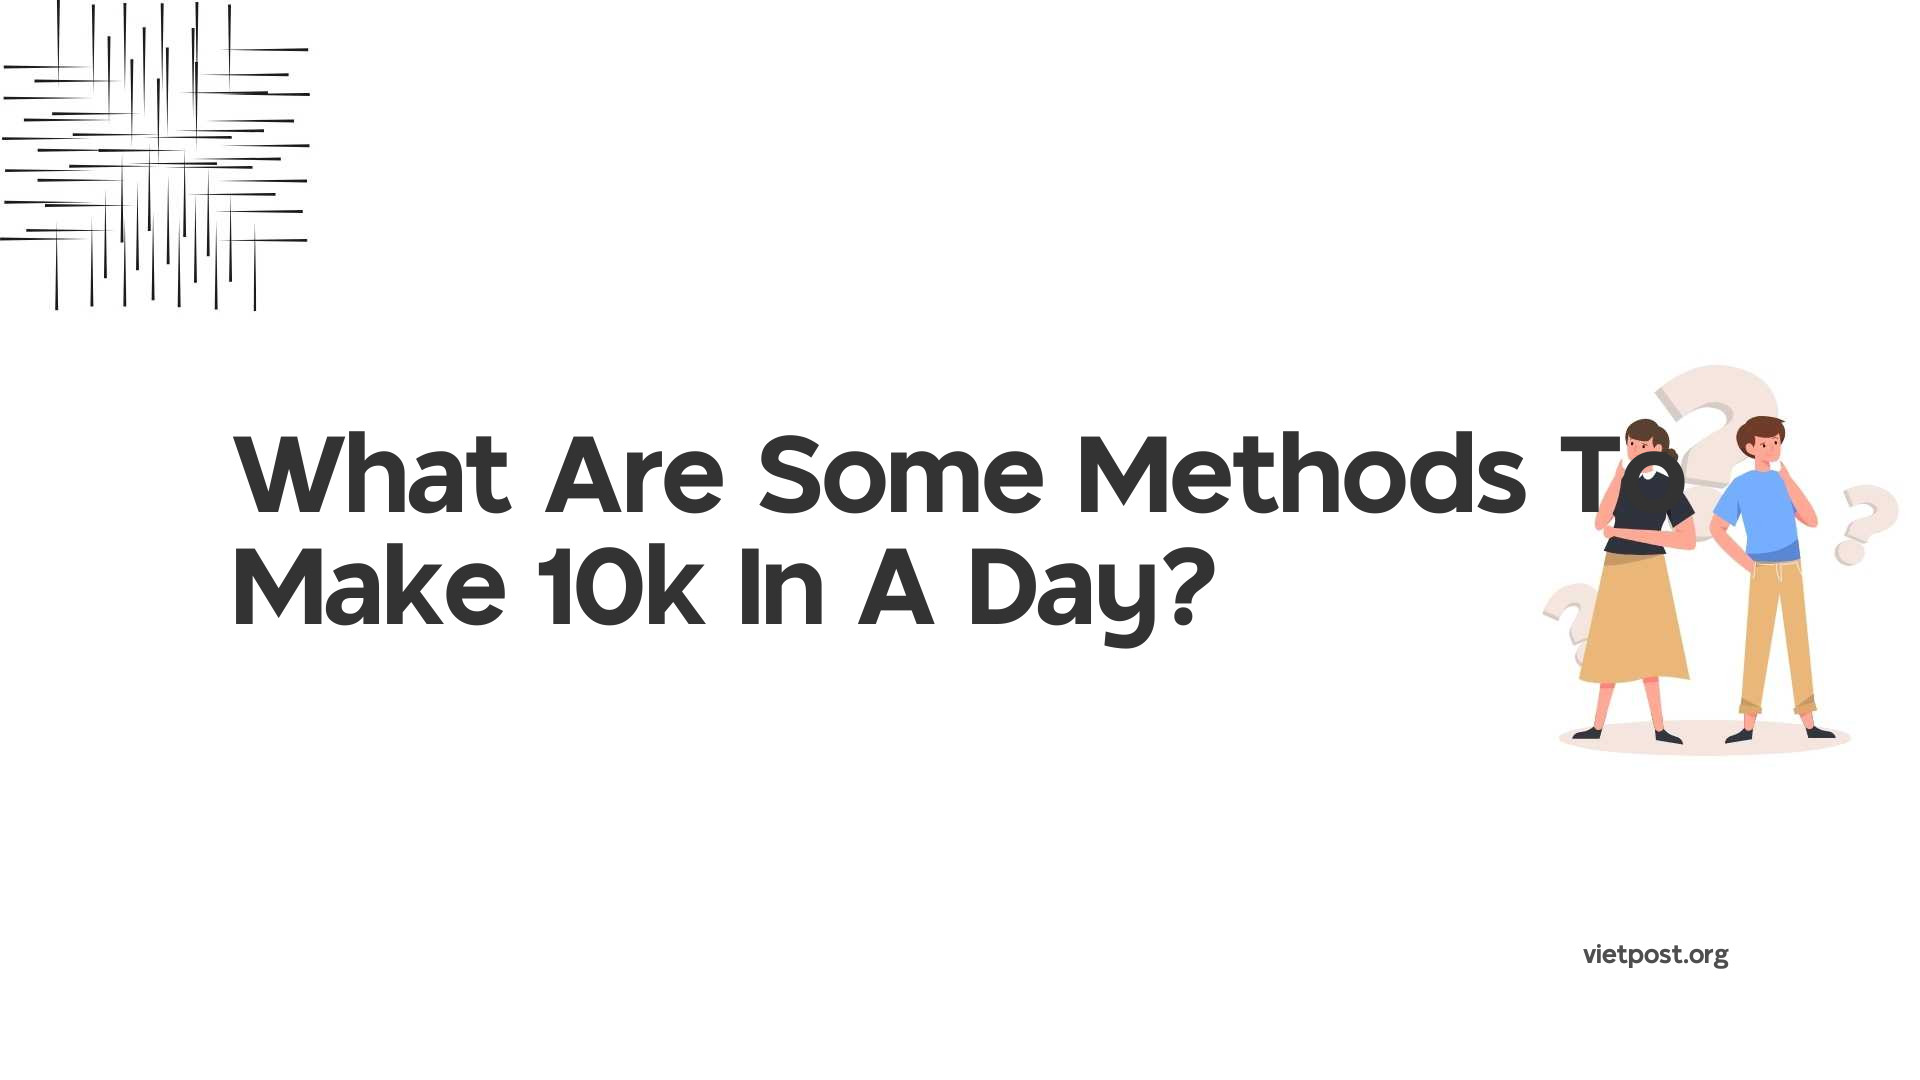 What Are Some Methods To Make 10k In A Day?